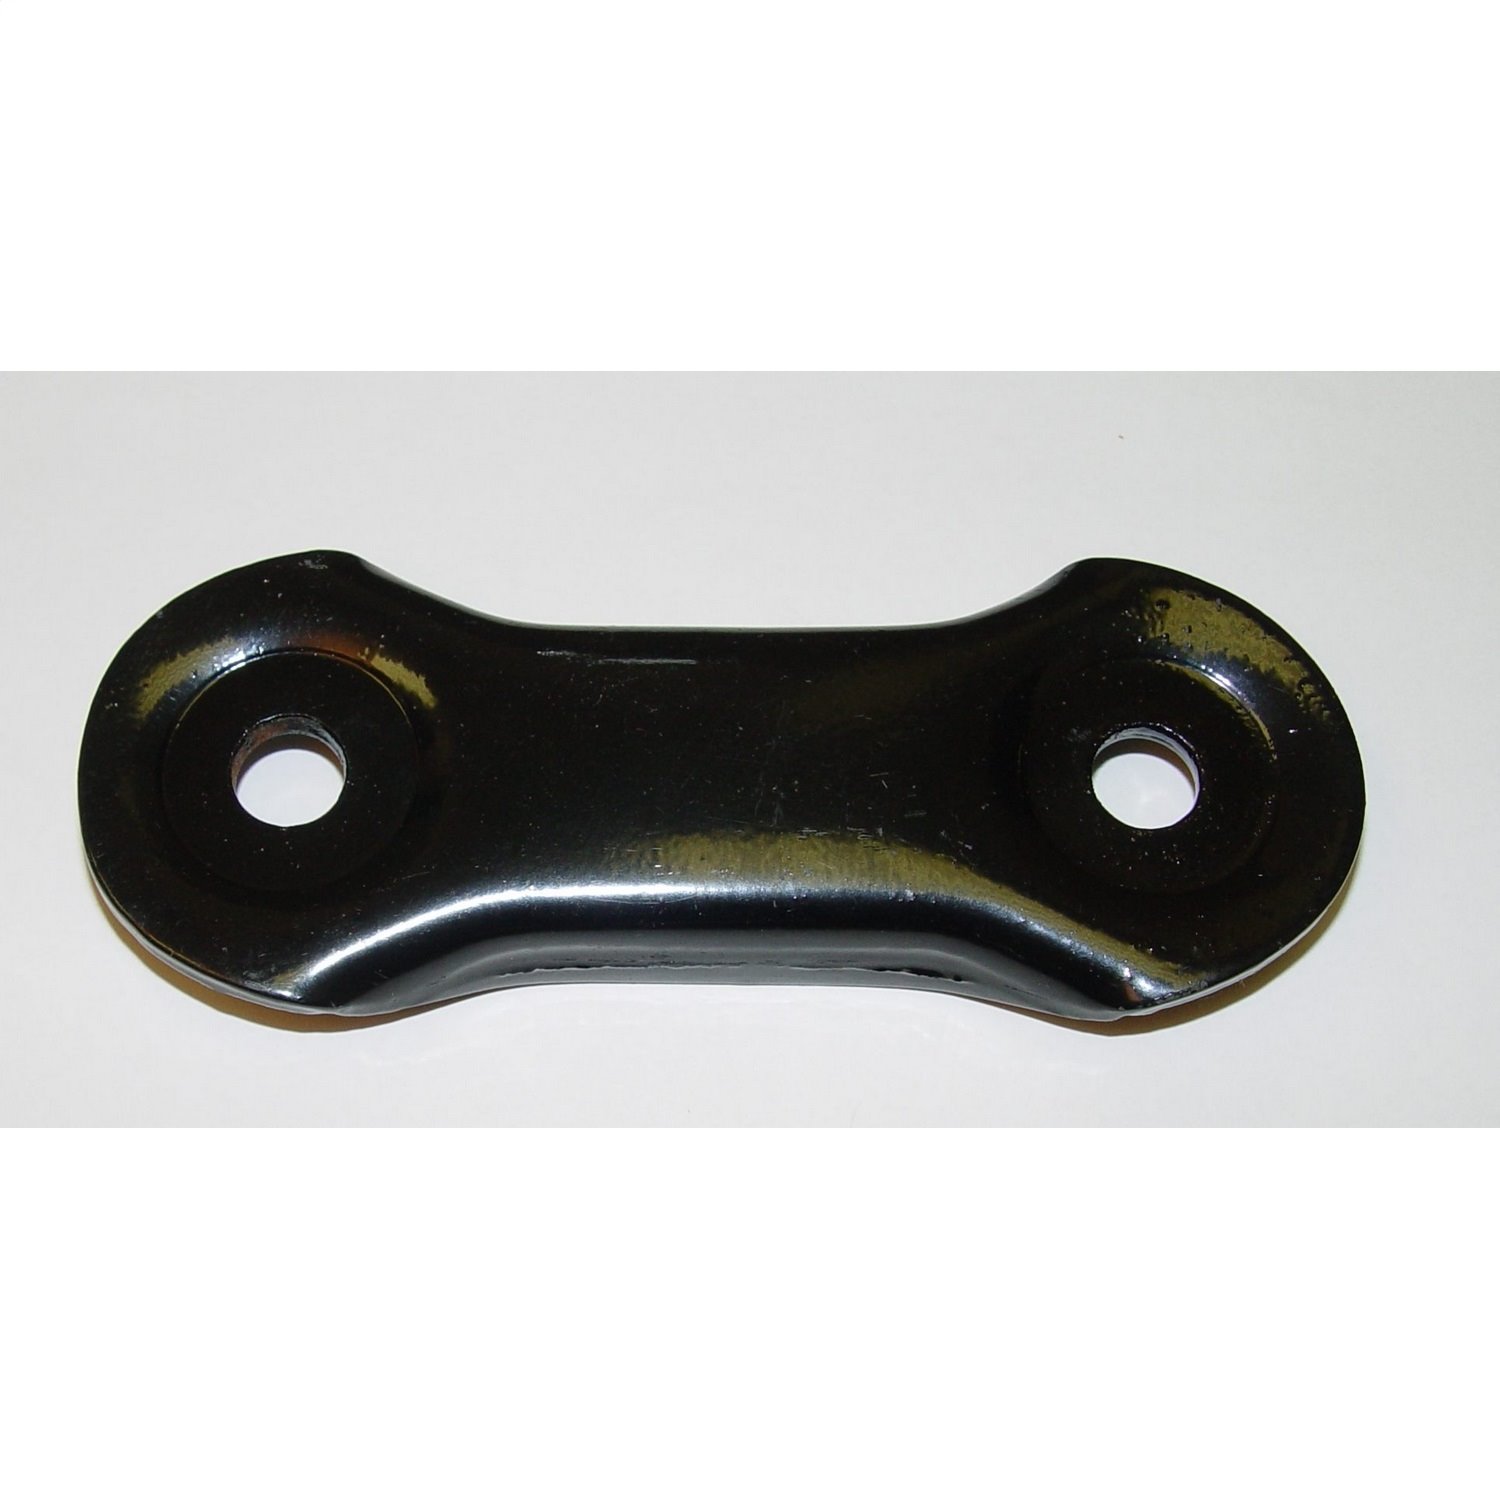 Replacement leaf spring shackle side plate from Omix-ADA, Fits 87-95 Jeep Wrangler YJSold ind